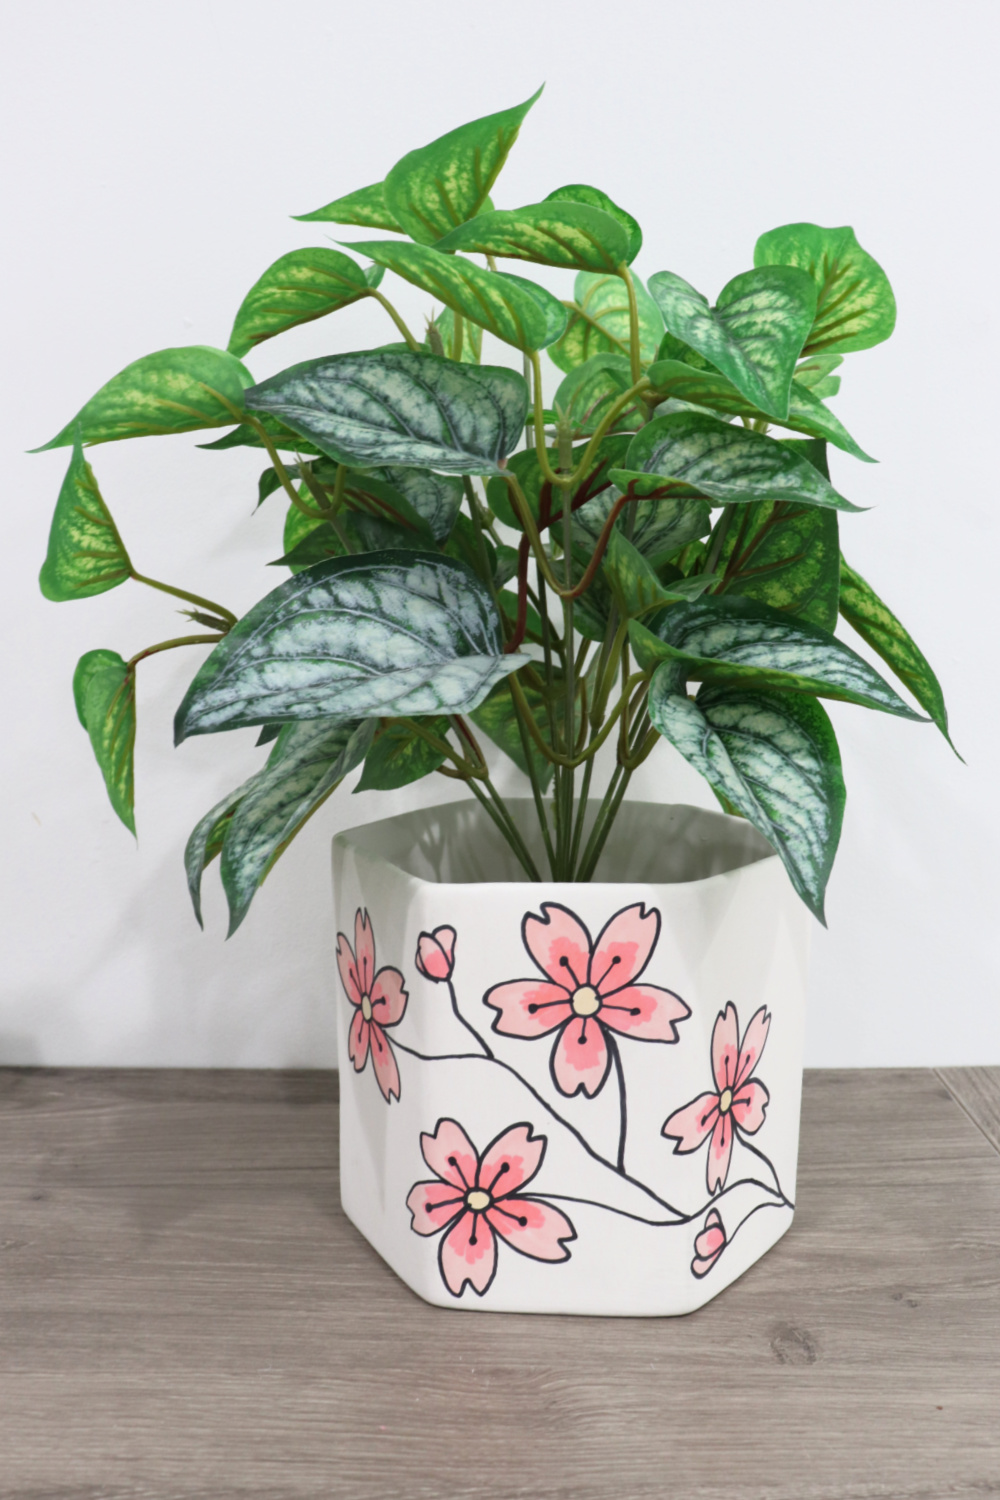 Image contains a faux plant in a white planter covered with cherry blossom illustrations. It sits on a wooden desktop.